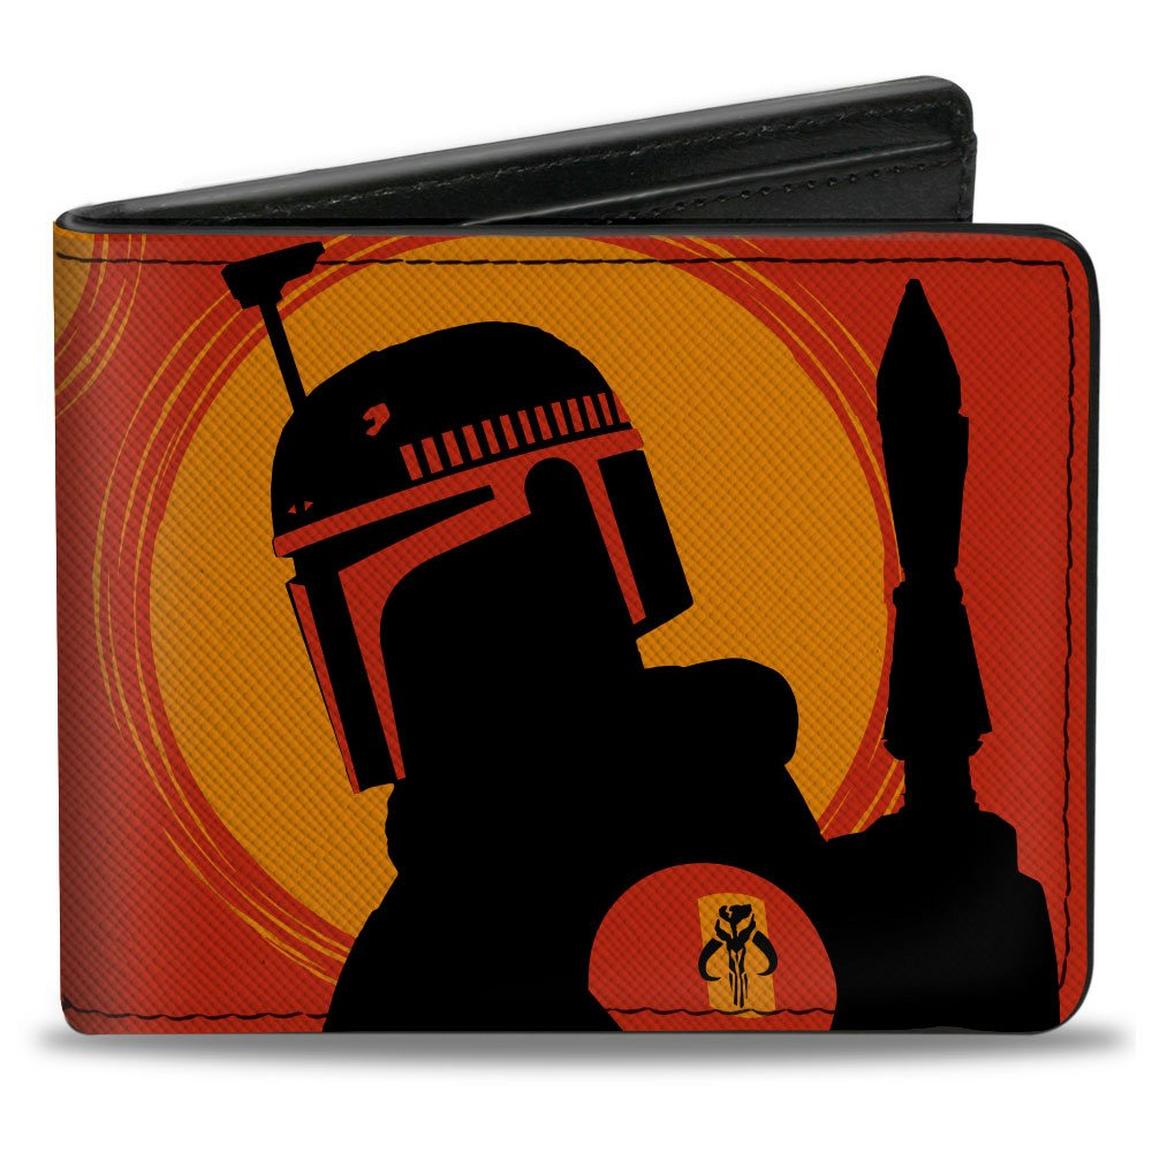 Buckle-Down Star Wars The Book of Boba Fett Vegan Leather Bifold Wallet, Size: One Size, Buckle Down